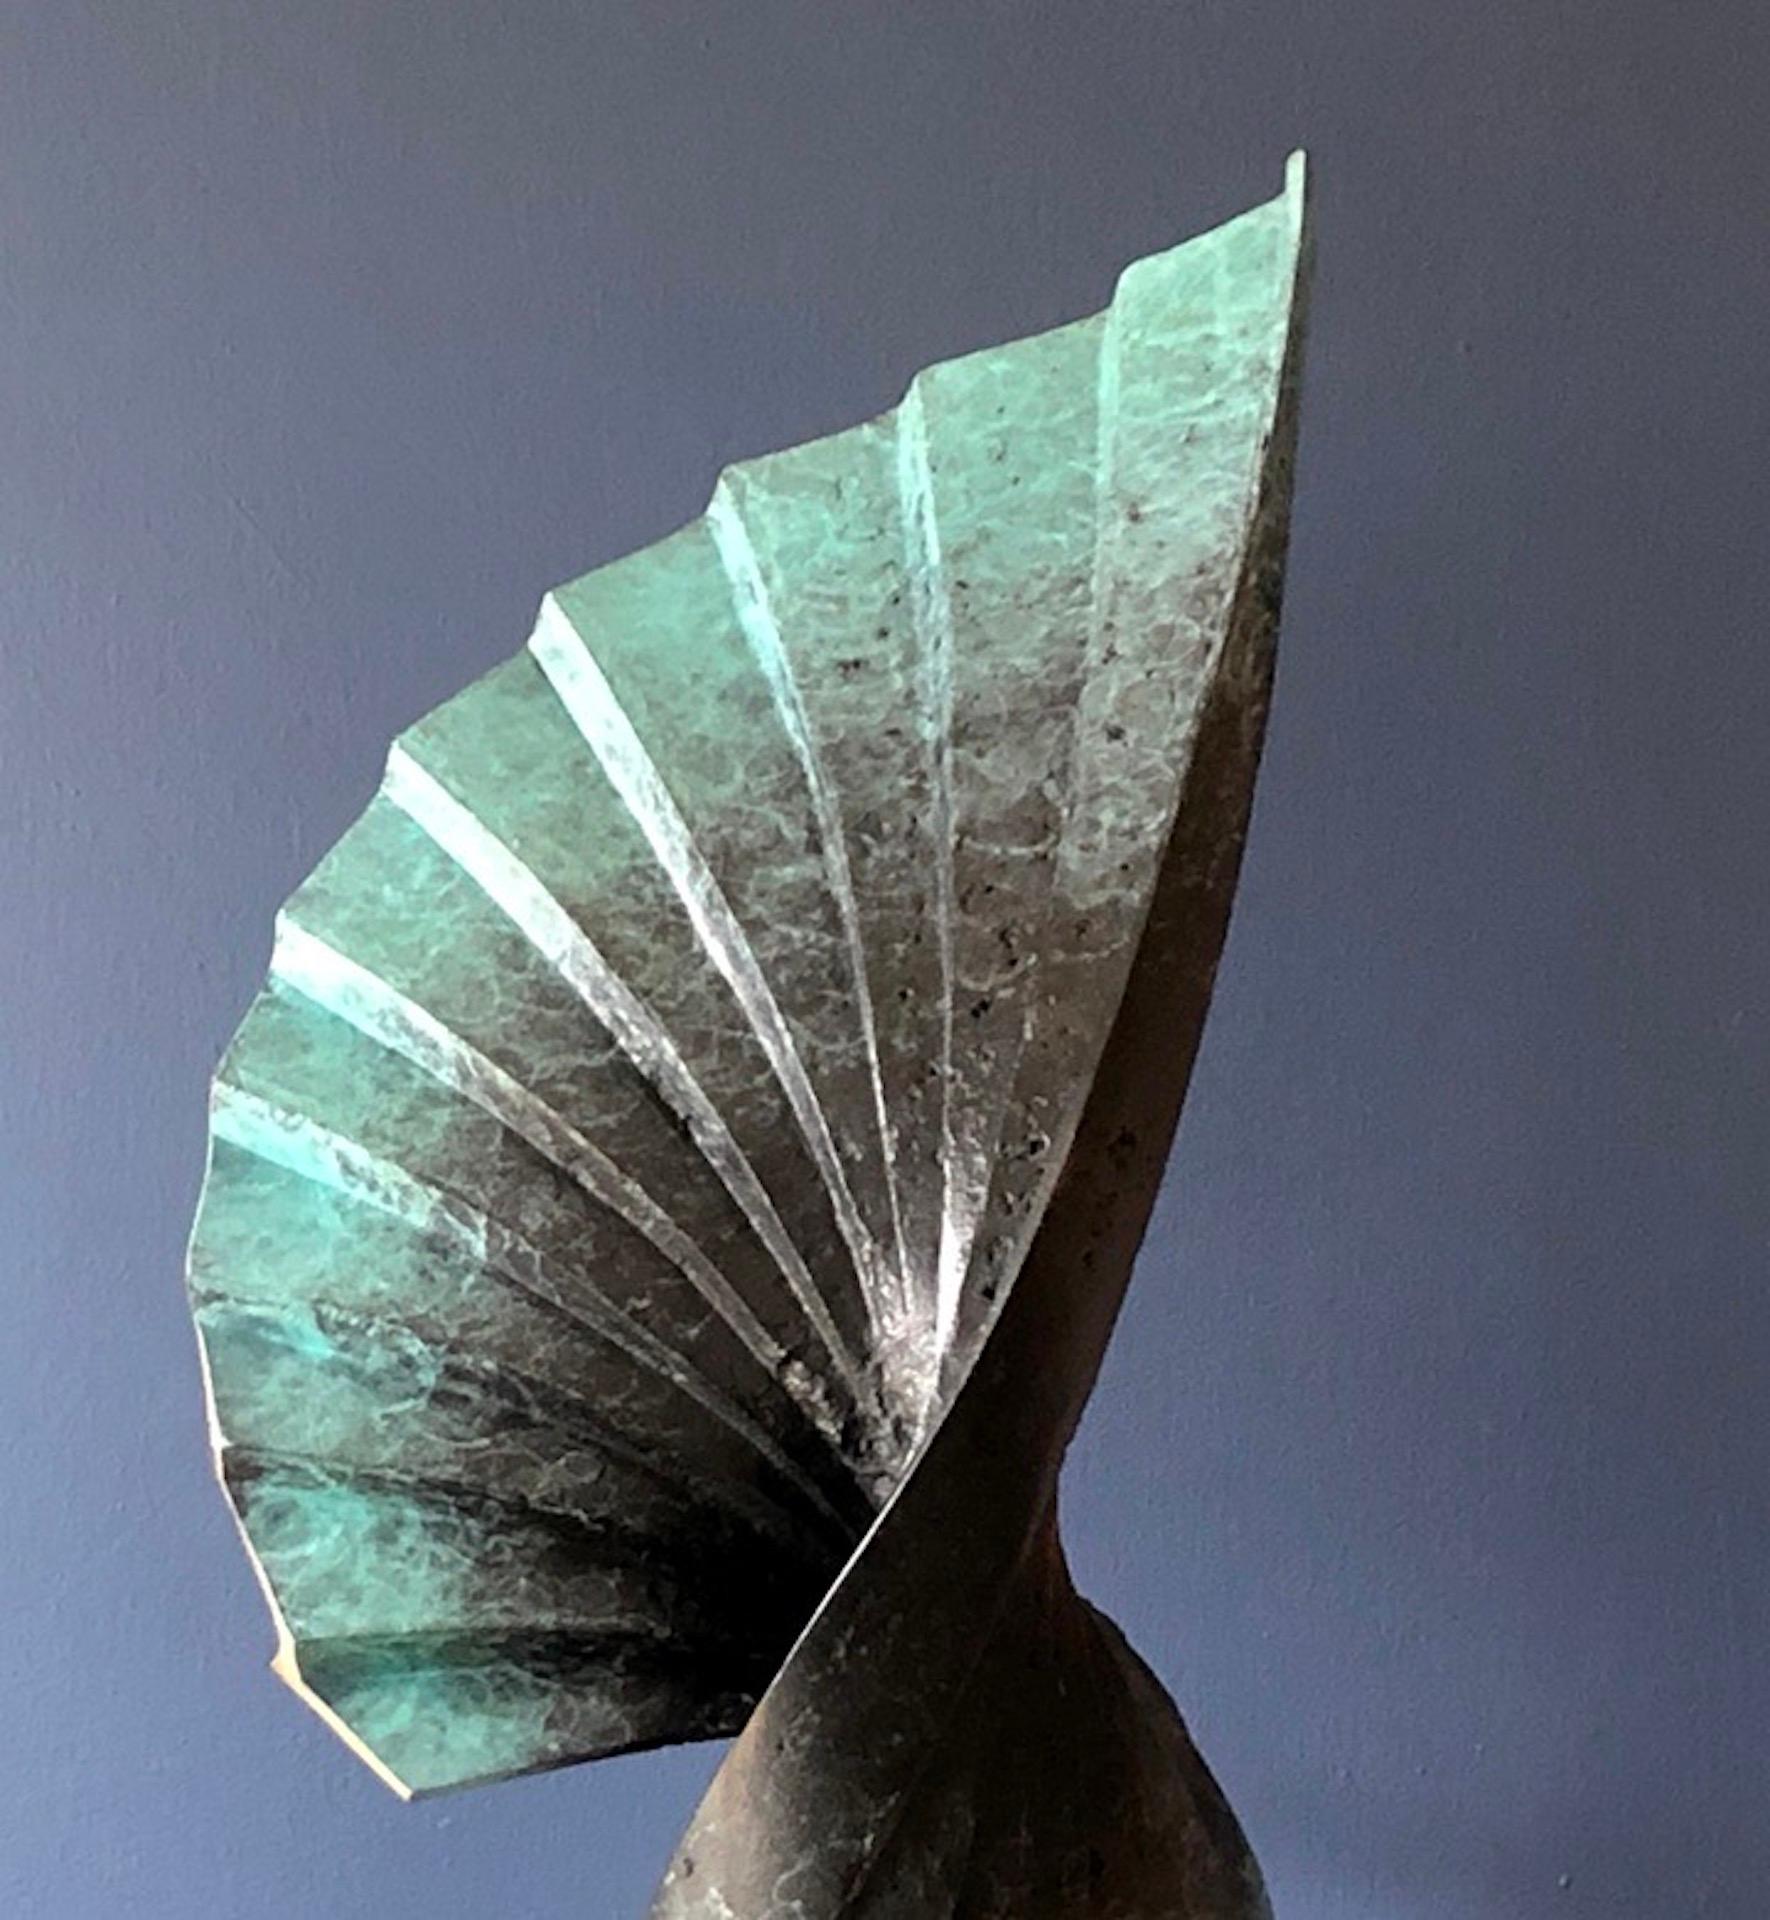 Cast Unique bronze tabletop sculpture based on forms made by folding pleated paper